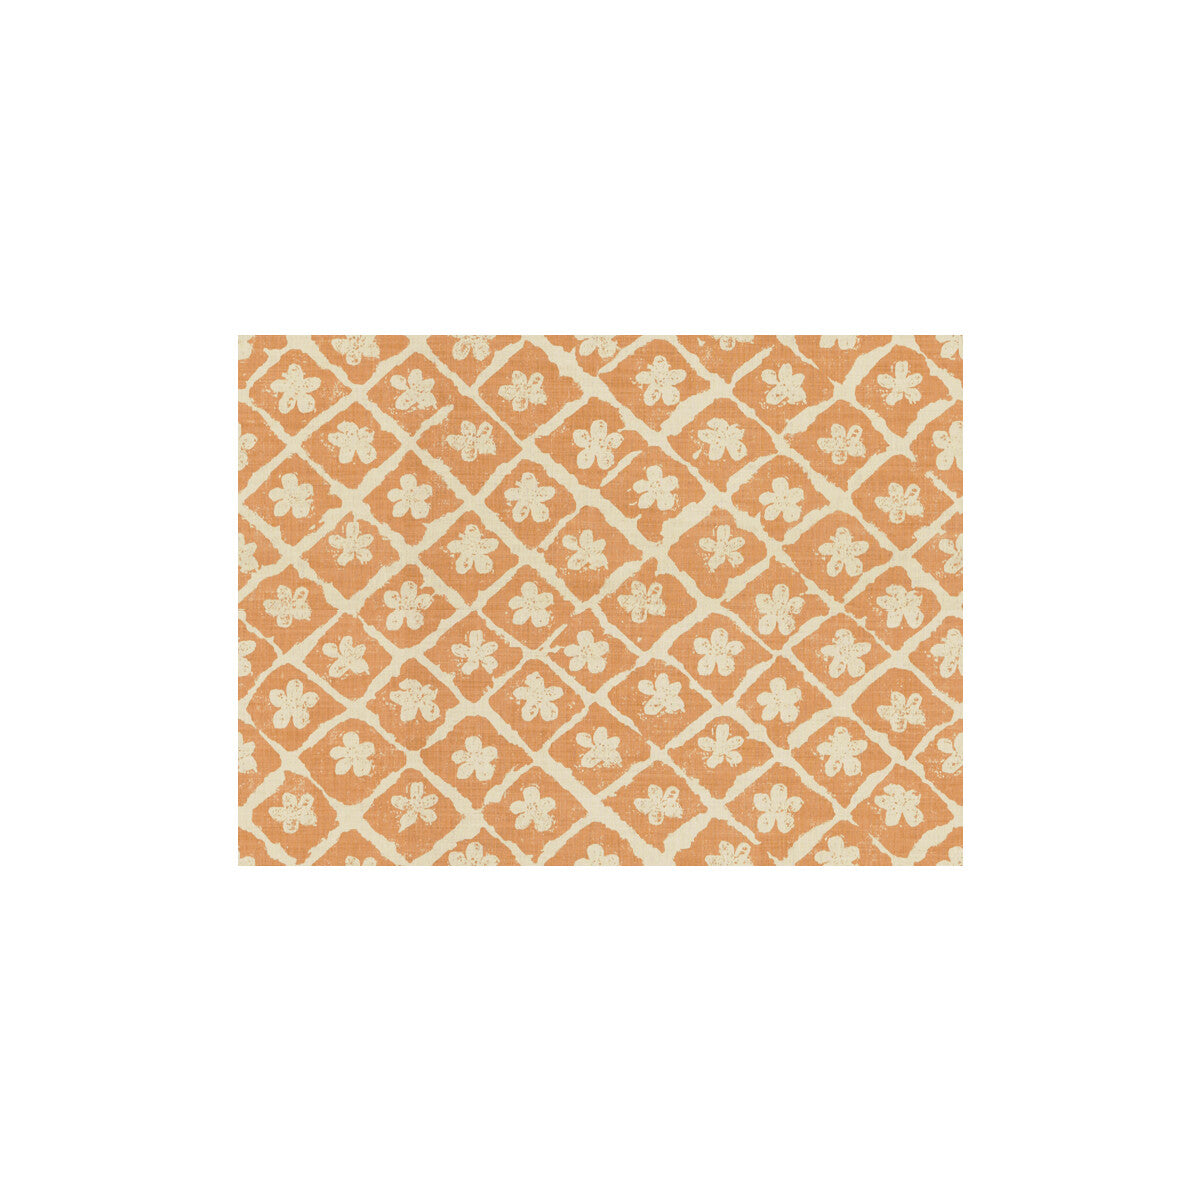 Pomeroy fabric in pumpkin/natural color - pattern BFC-3522.22.0 - by Lee Jofa in the Blithfield collection